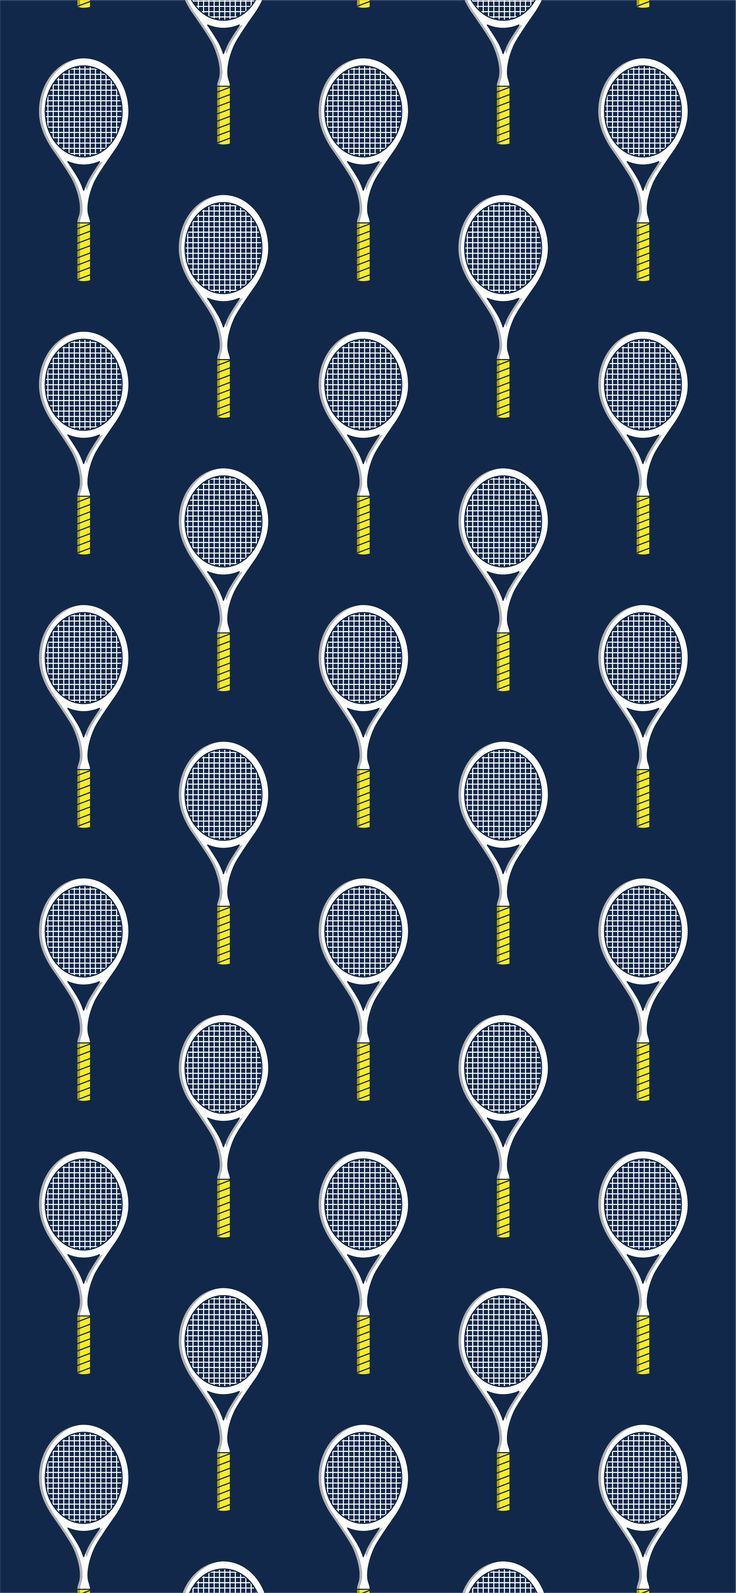 Tennis Racquet Wallpaper for iphone or android. Tennis wallpaper, Tennis posters, Tennis racquet